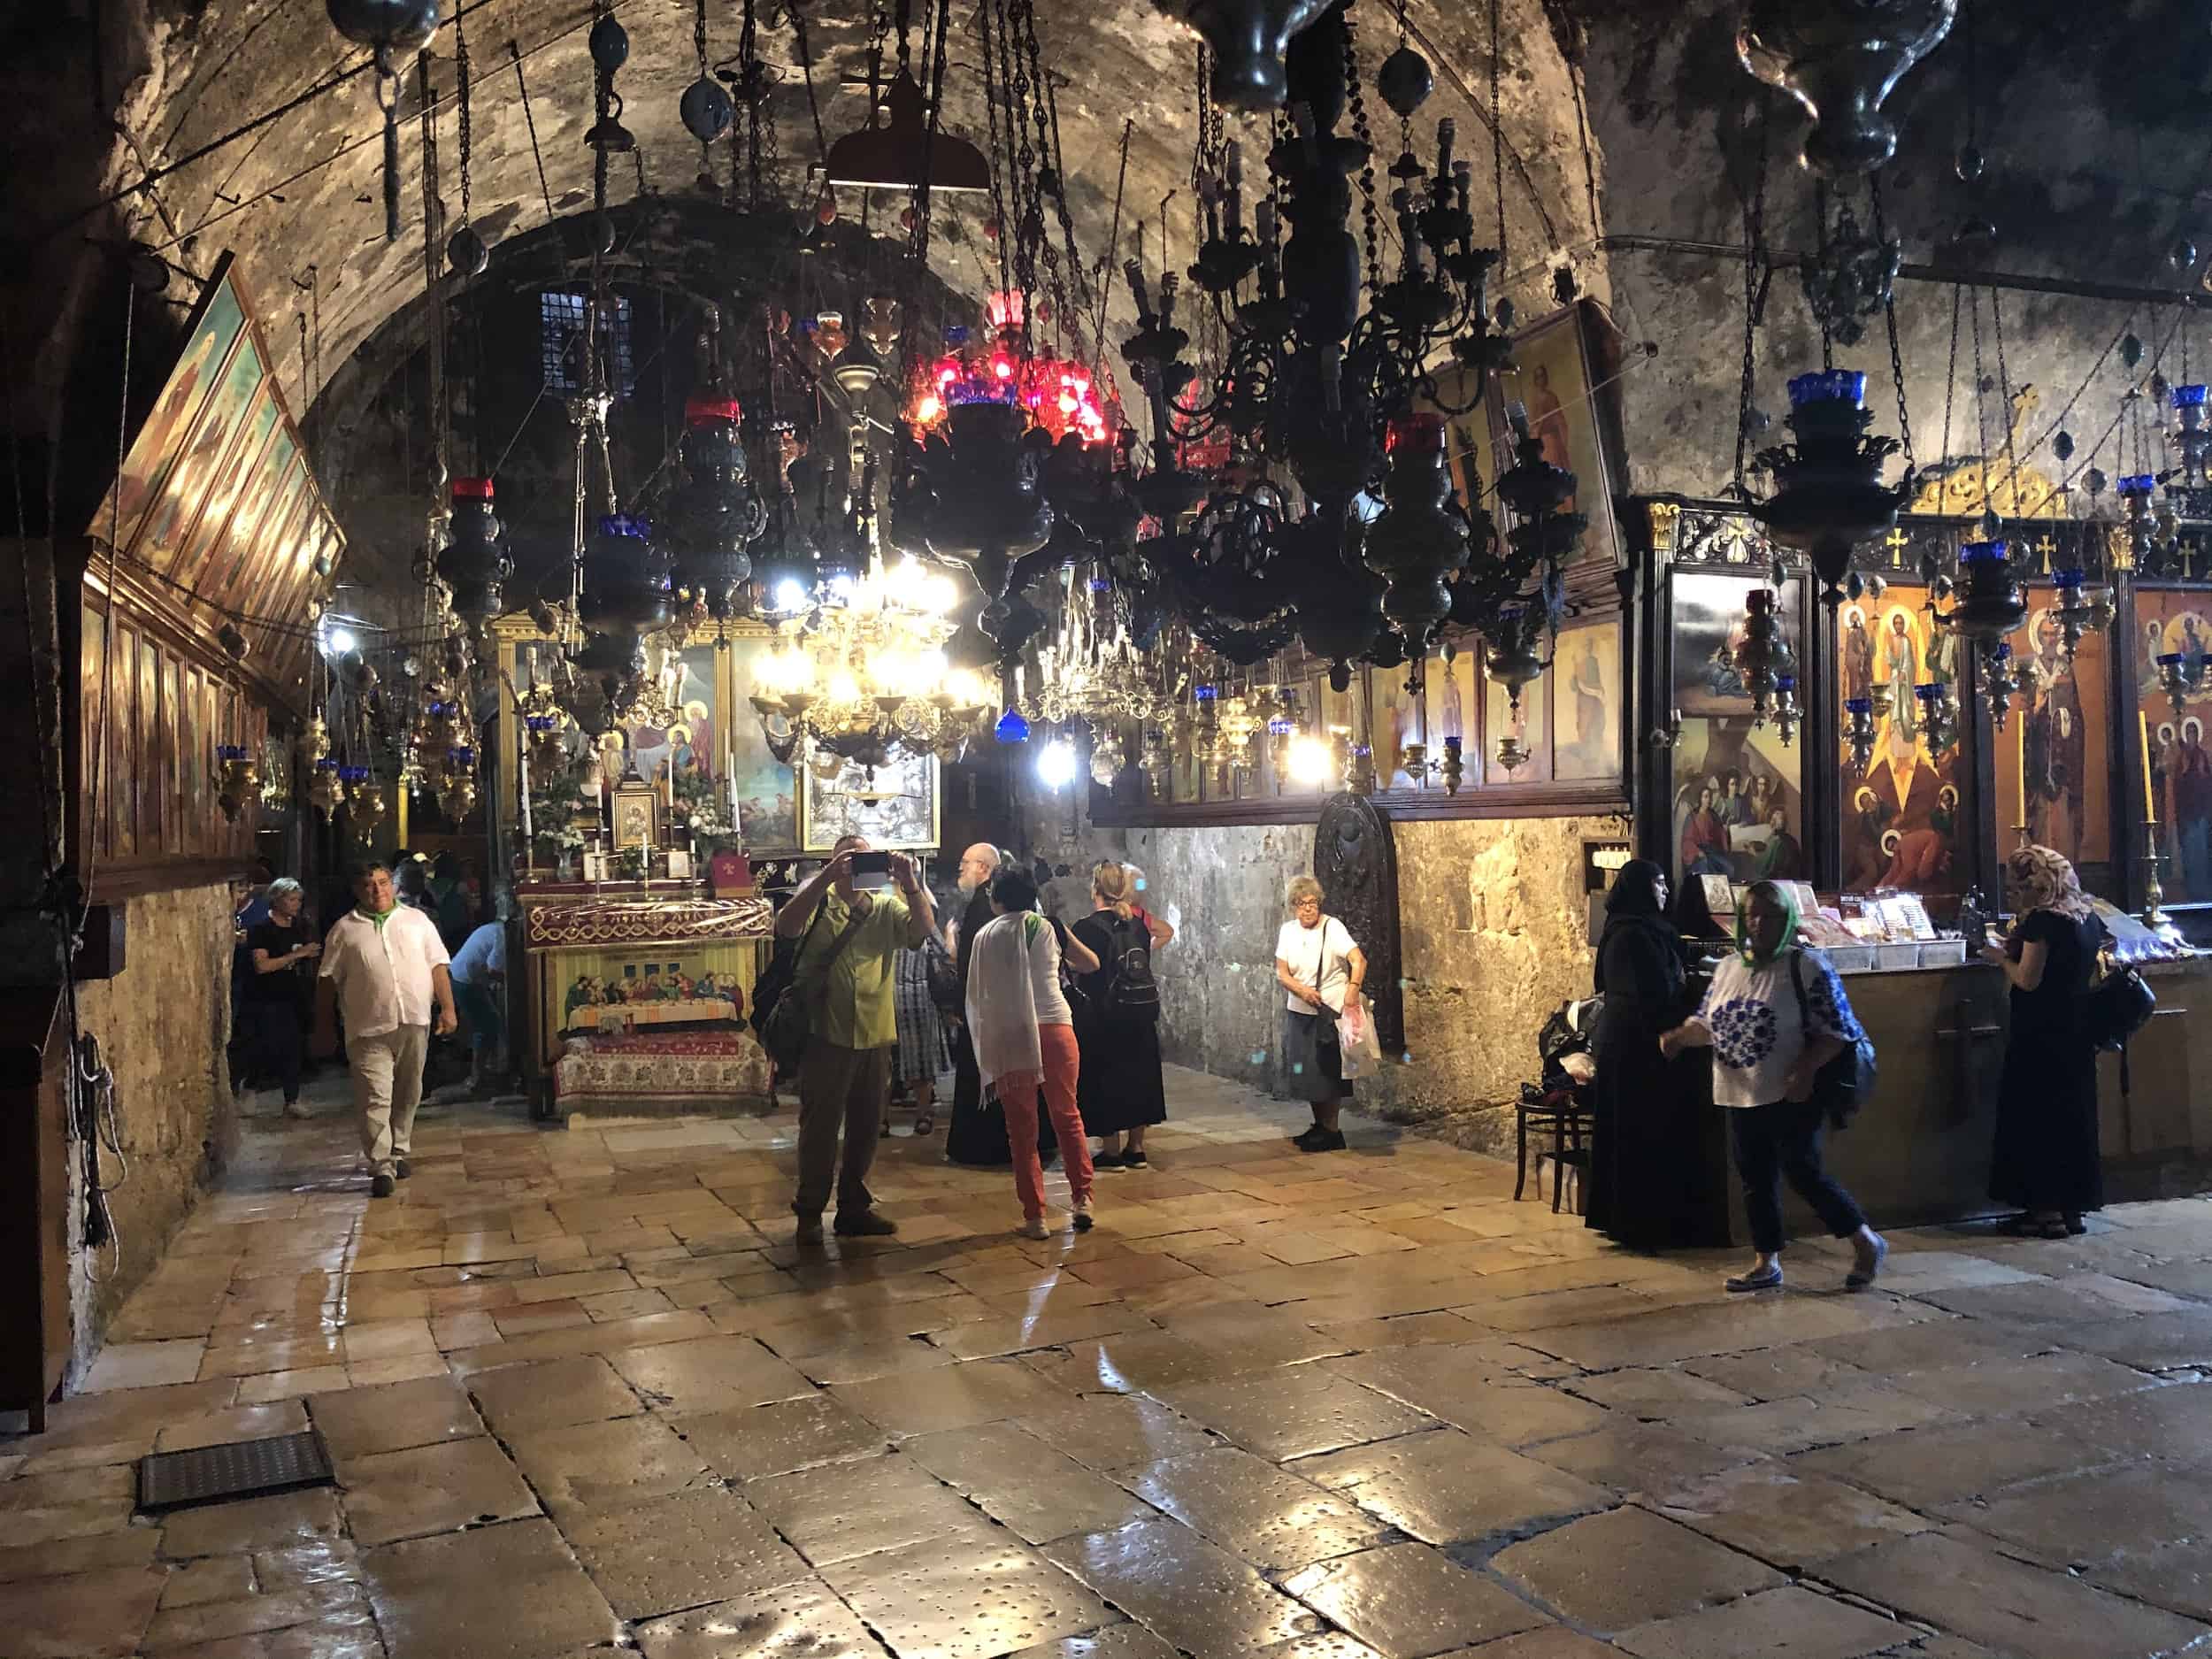 Church at the Tomb of the Virgin Mary at Gethsemane in Jerusalem